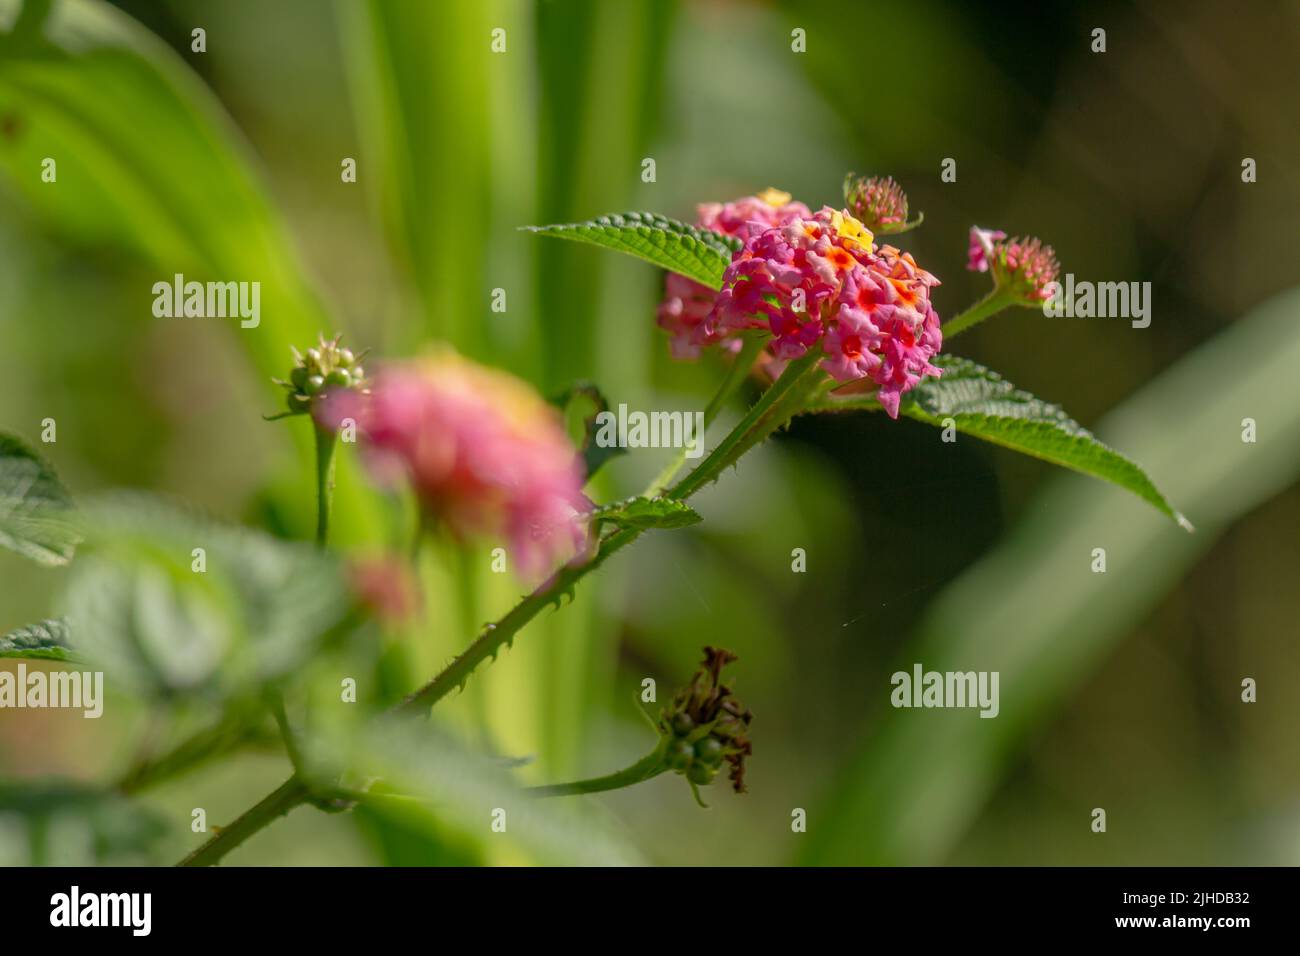 Flowers and leaves of the lantana camara plant, pink flower clusters with yellow tips, heart-shaped leaves with rough texture, mountainous natural veg Stock Photo